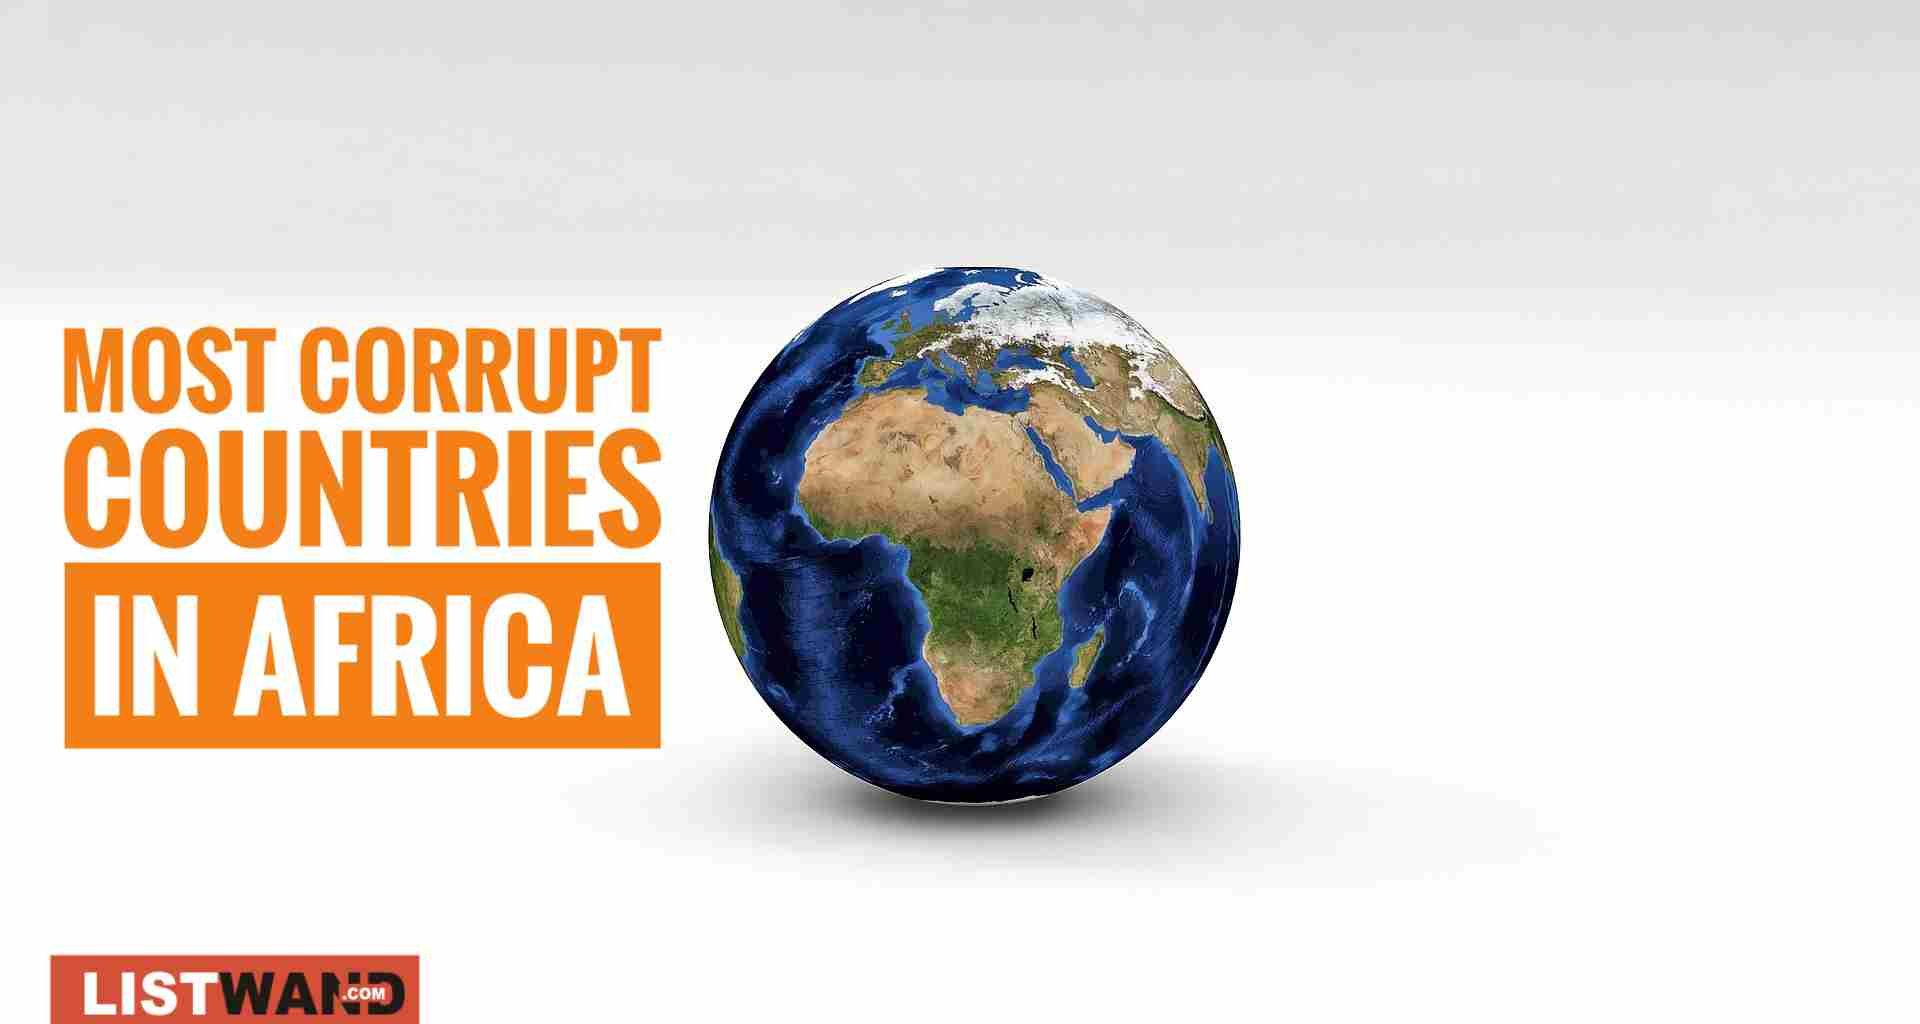 Top 20 Most Corrupt Countries in Africa, 2019